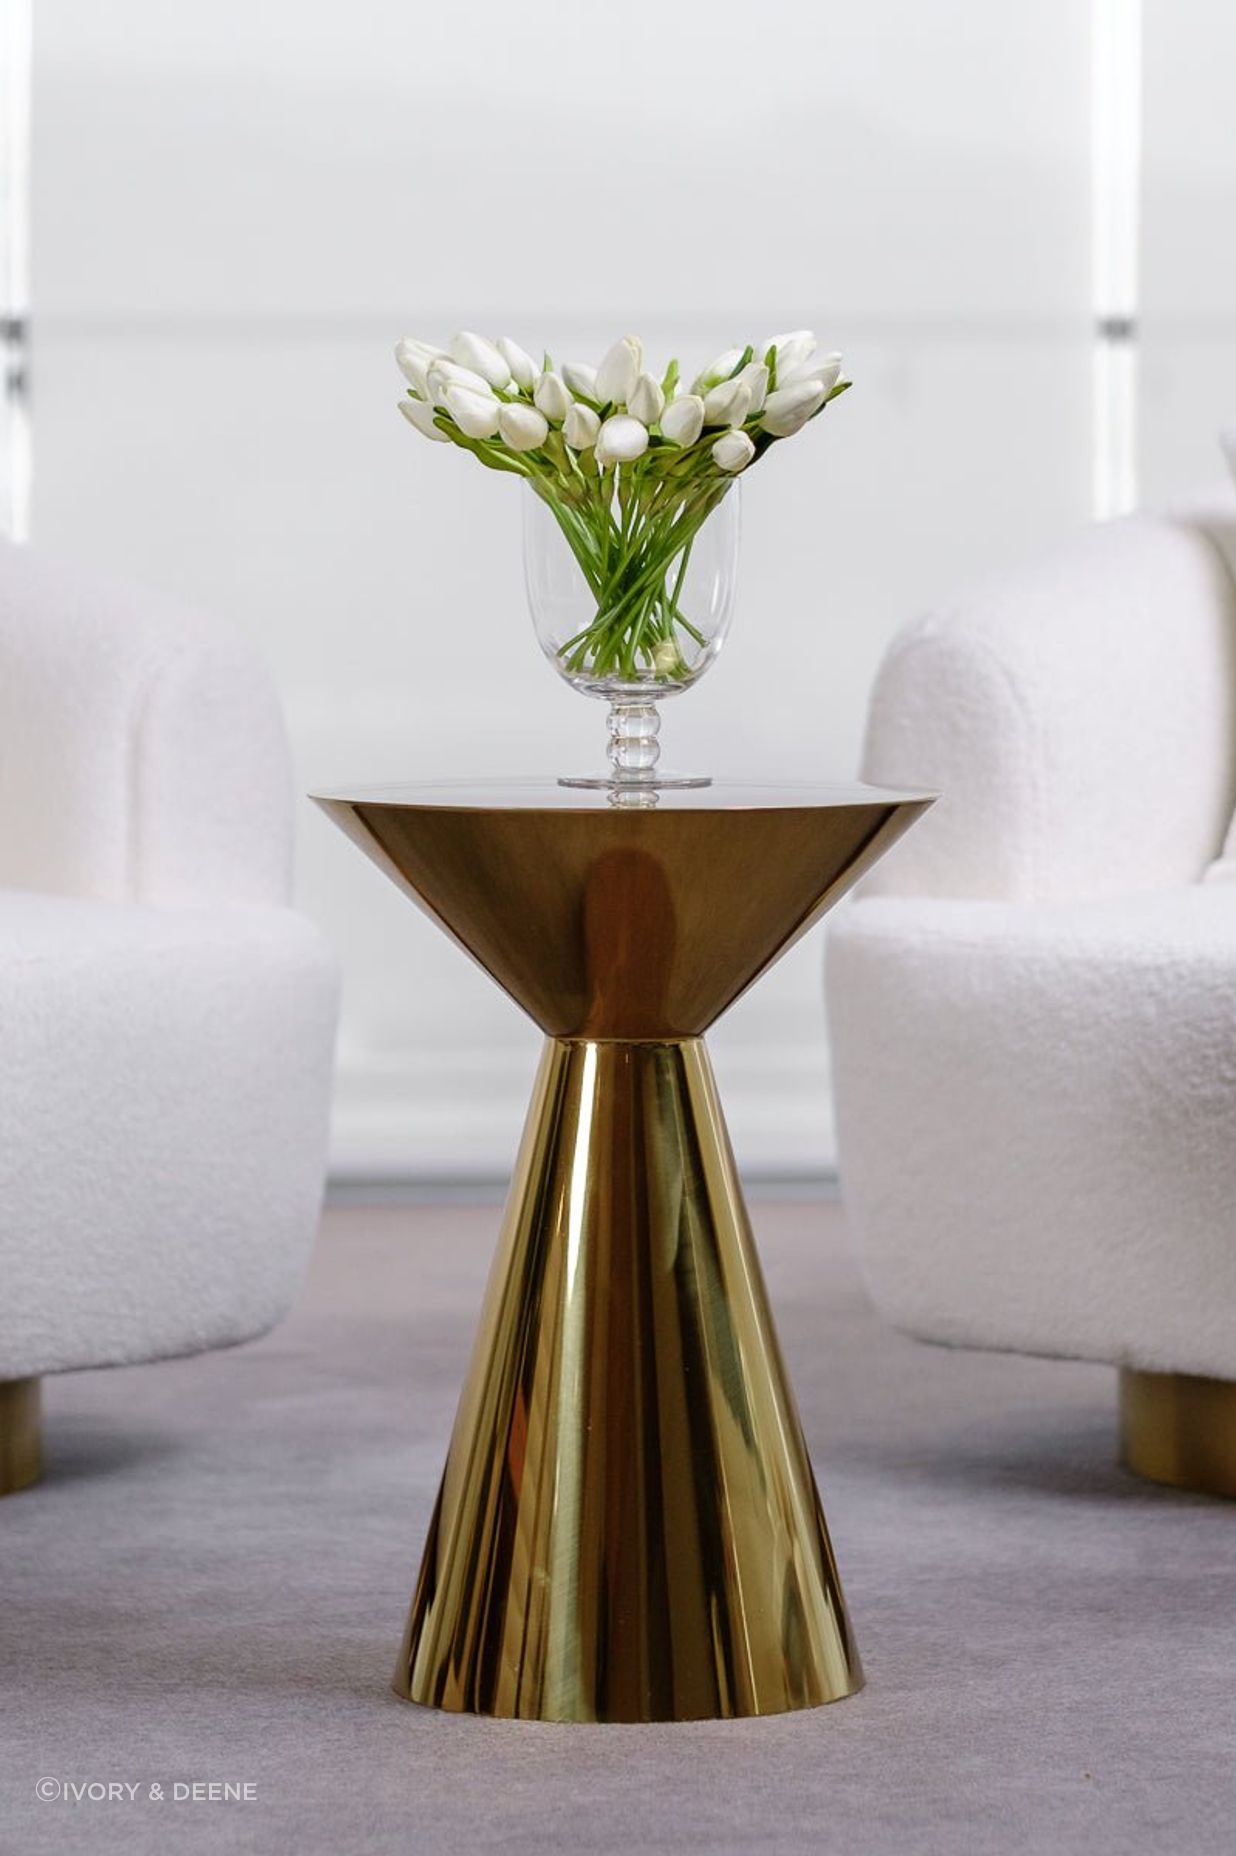 Luxurious materials like stainless steel can be crafted into a truly unique bedside table, making a distinct style statement. Featured product: Vogue Side Table.